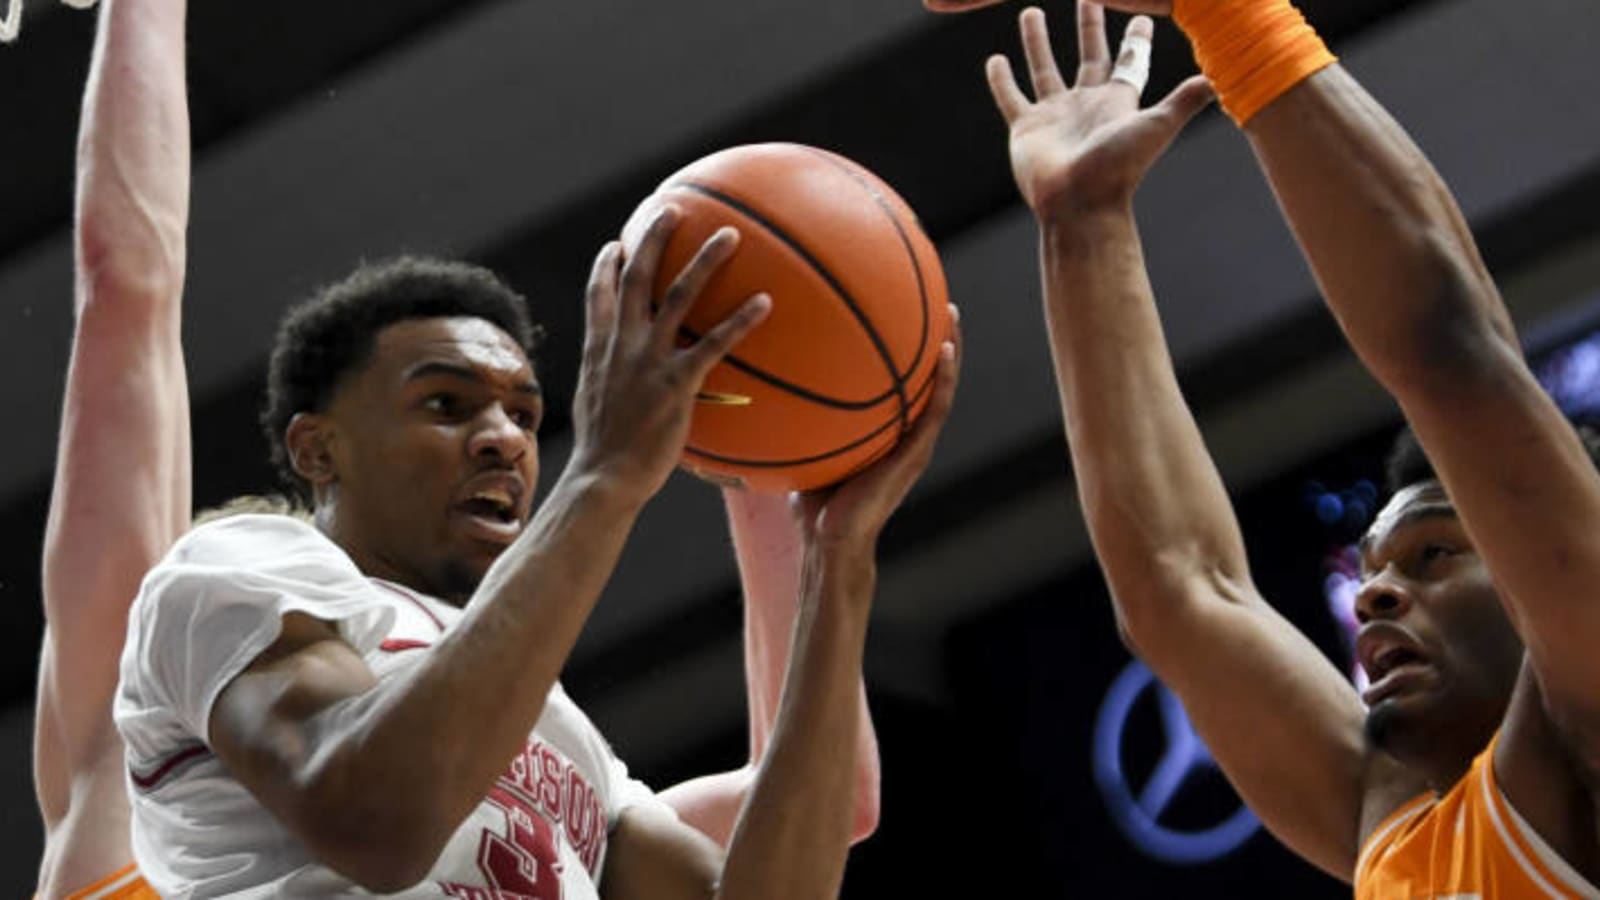 Second Half Cold Streak Freezes No. 14 Alabama in Loss to No. 4 Tennessee